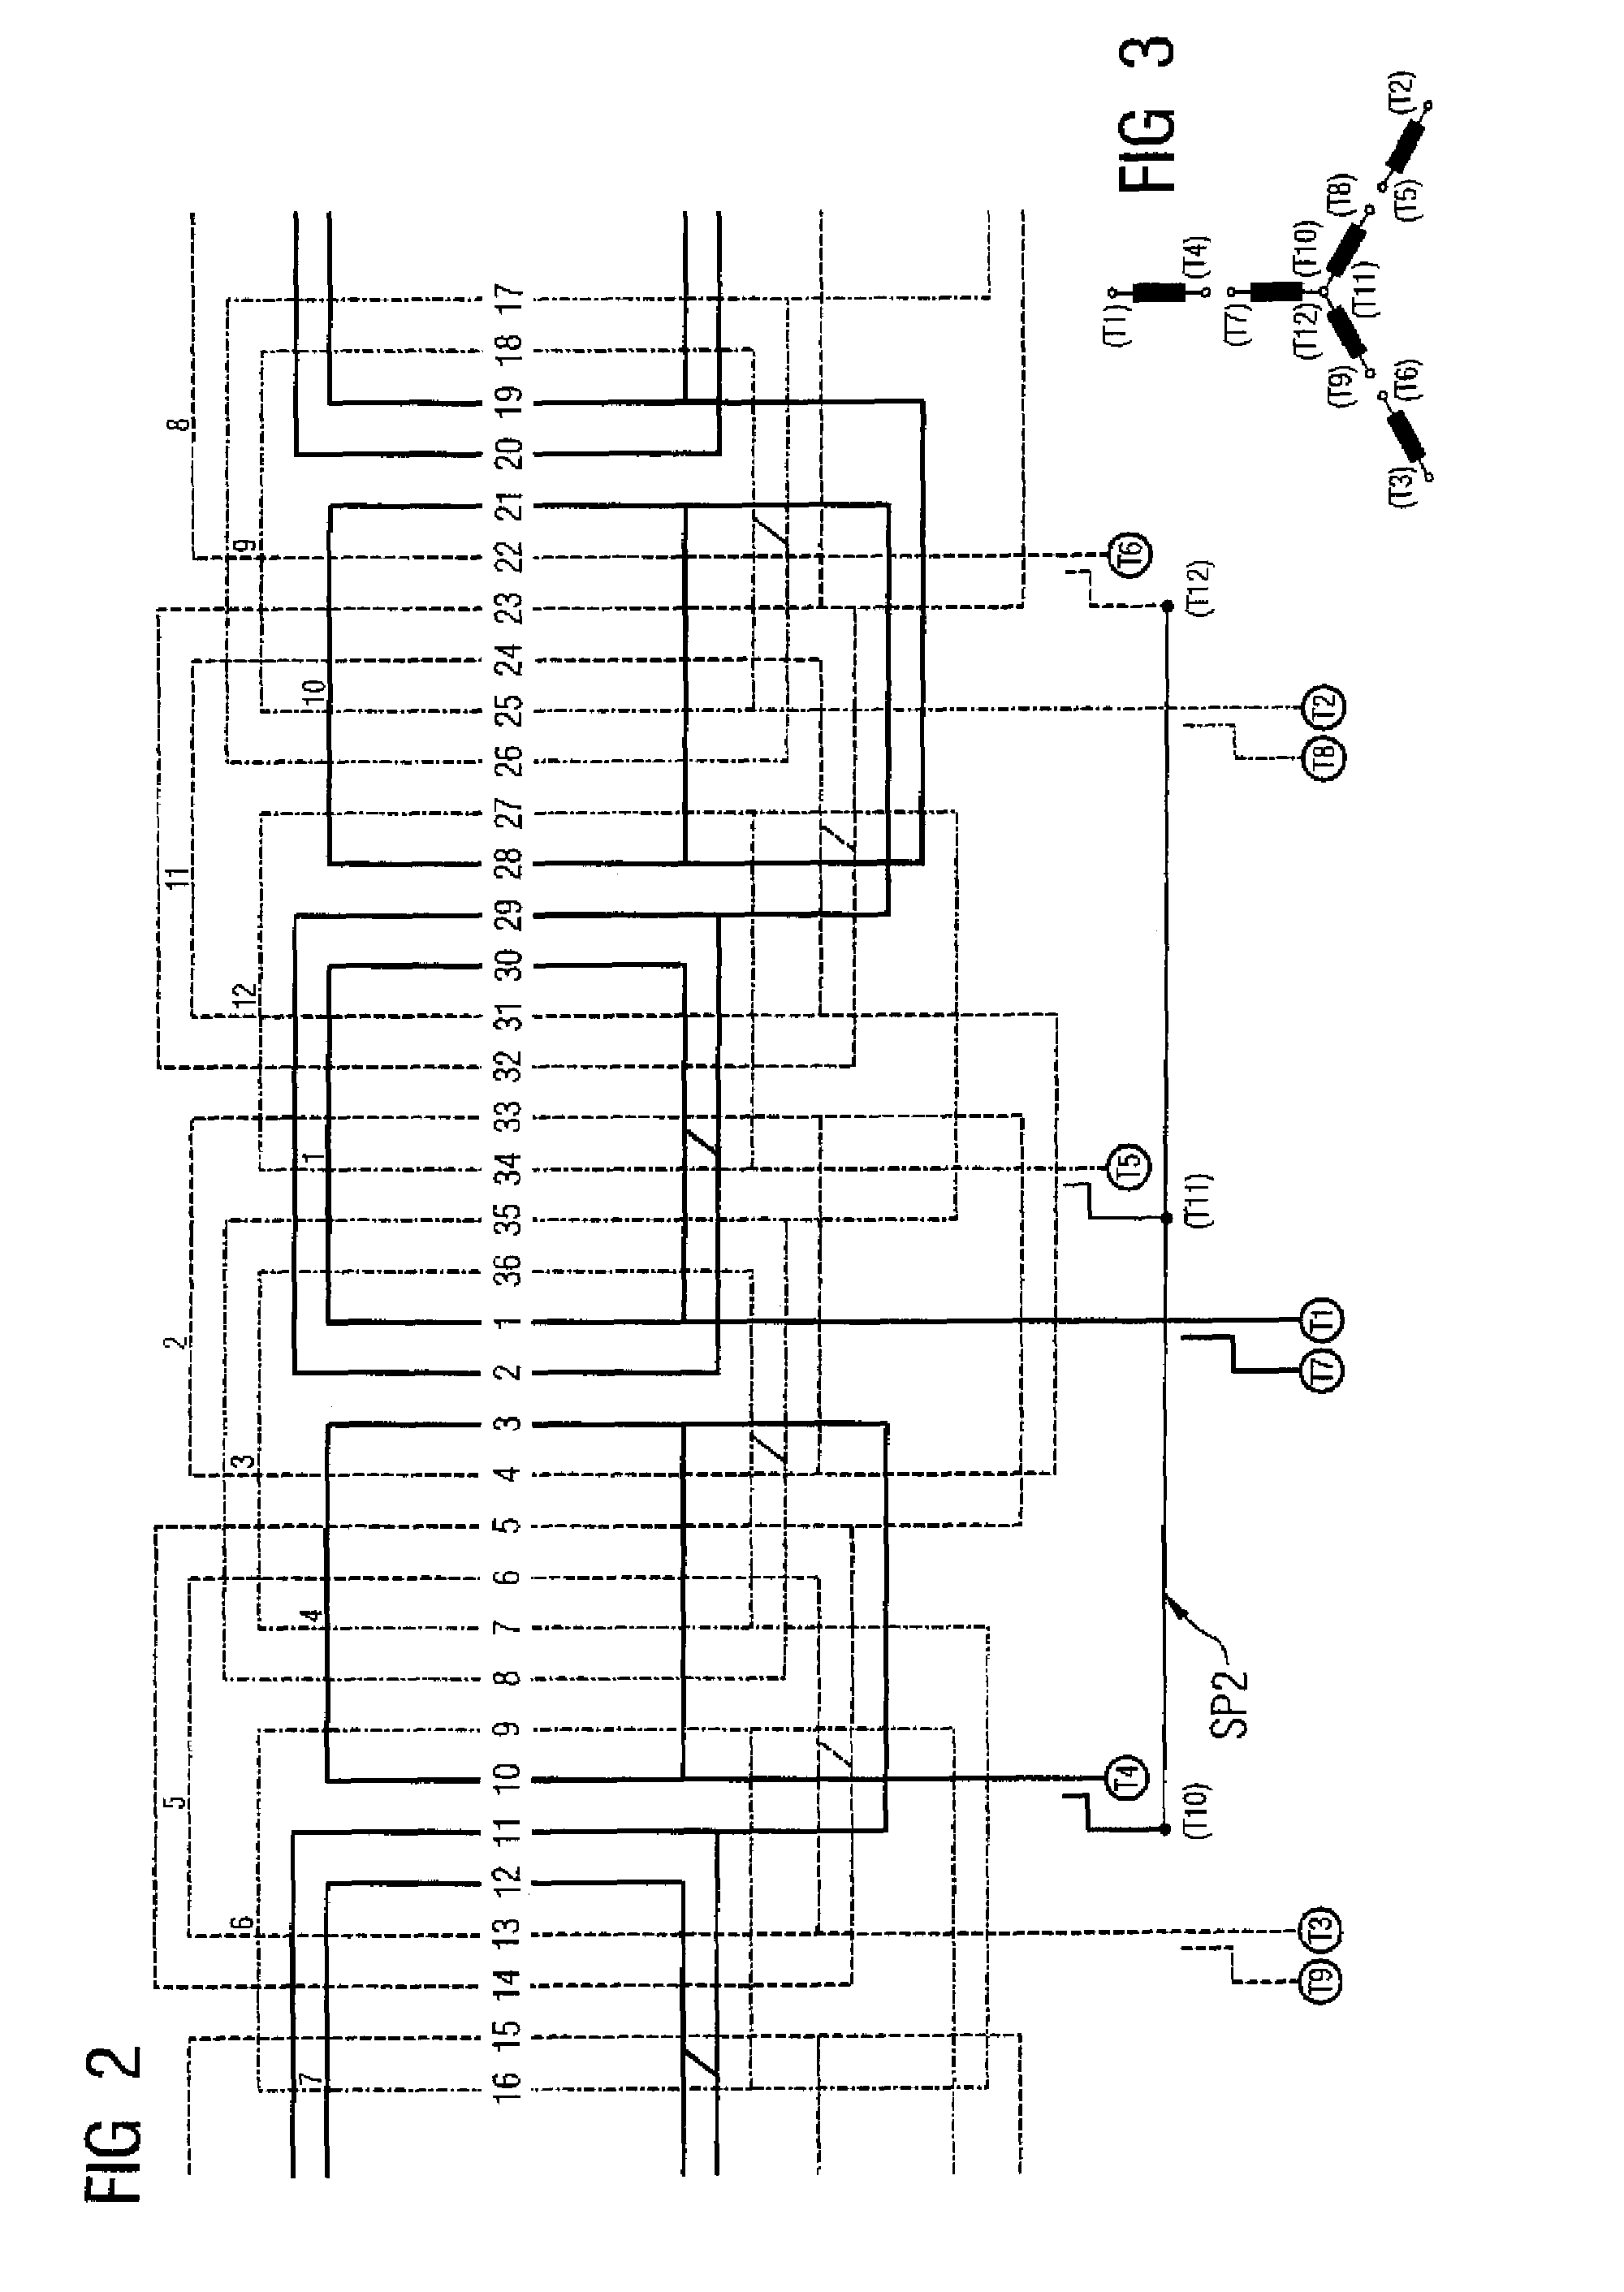 Electrical machine with part-winding circuit